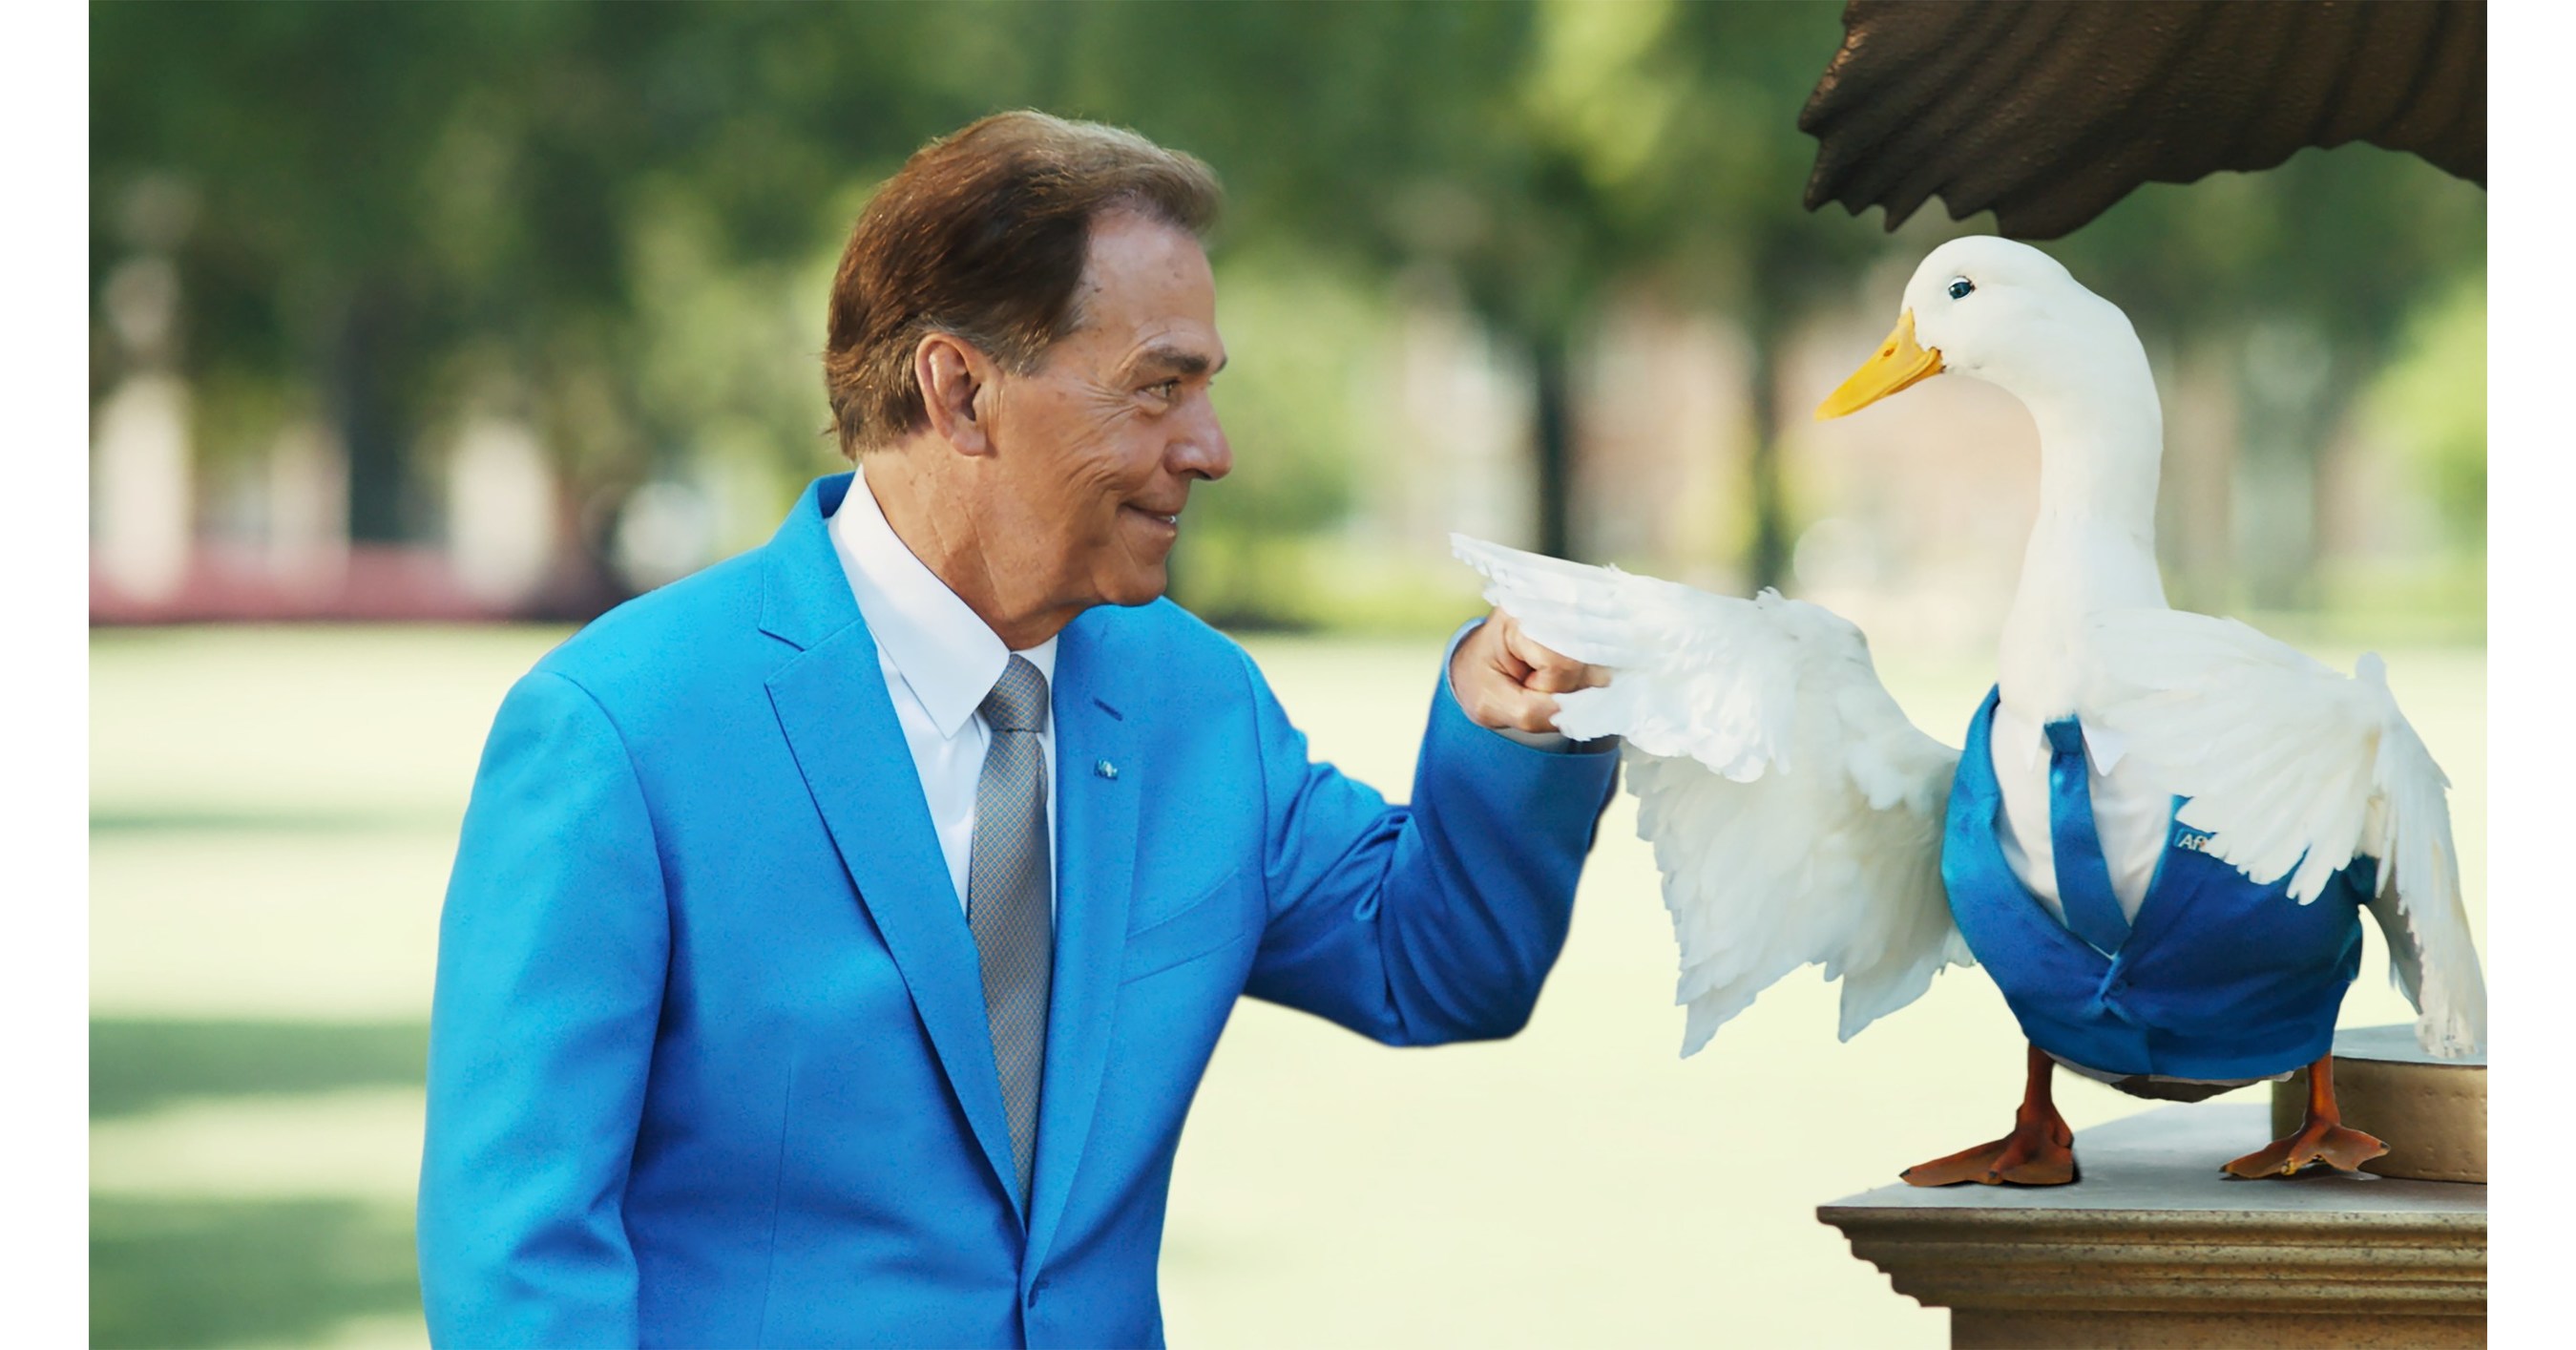 In Latest Campaign, Aflac and Legendary Football Coach Nick Saban Reunite to Show How Aflac Helps Pay Expenses Health Insurance Doesn't Cover